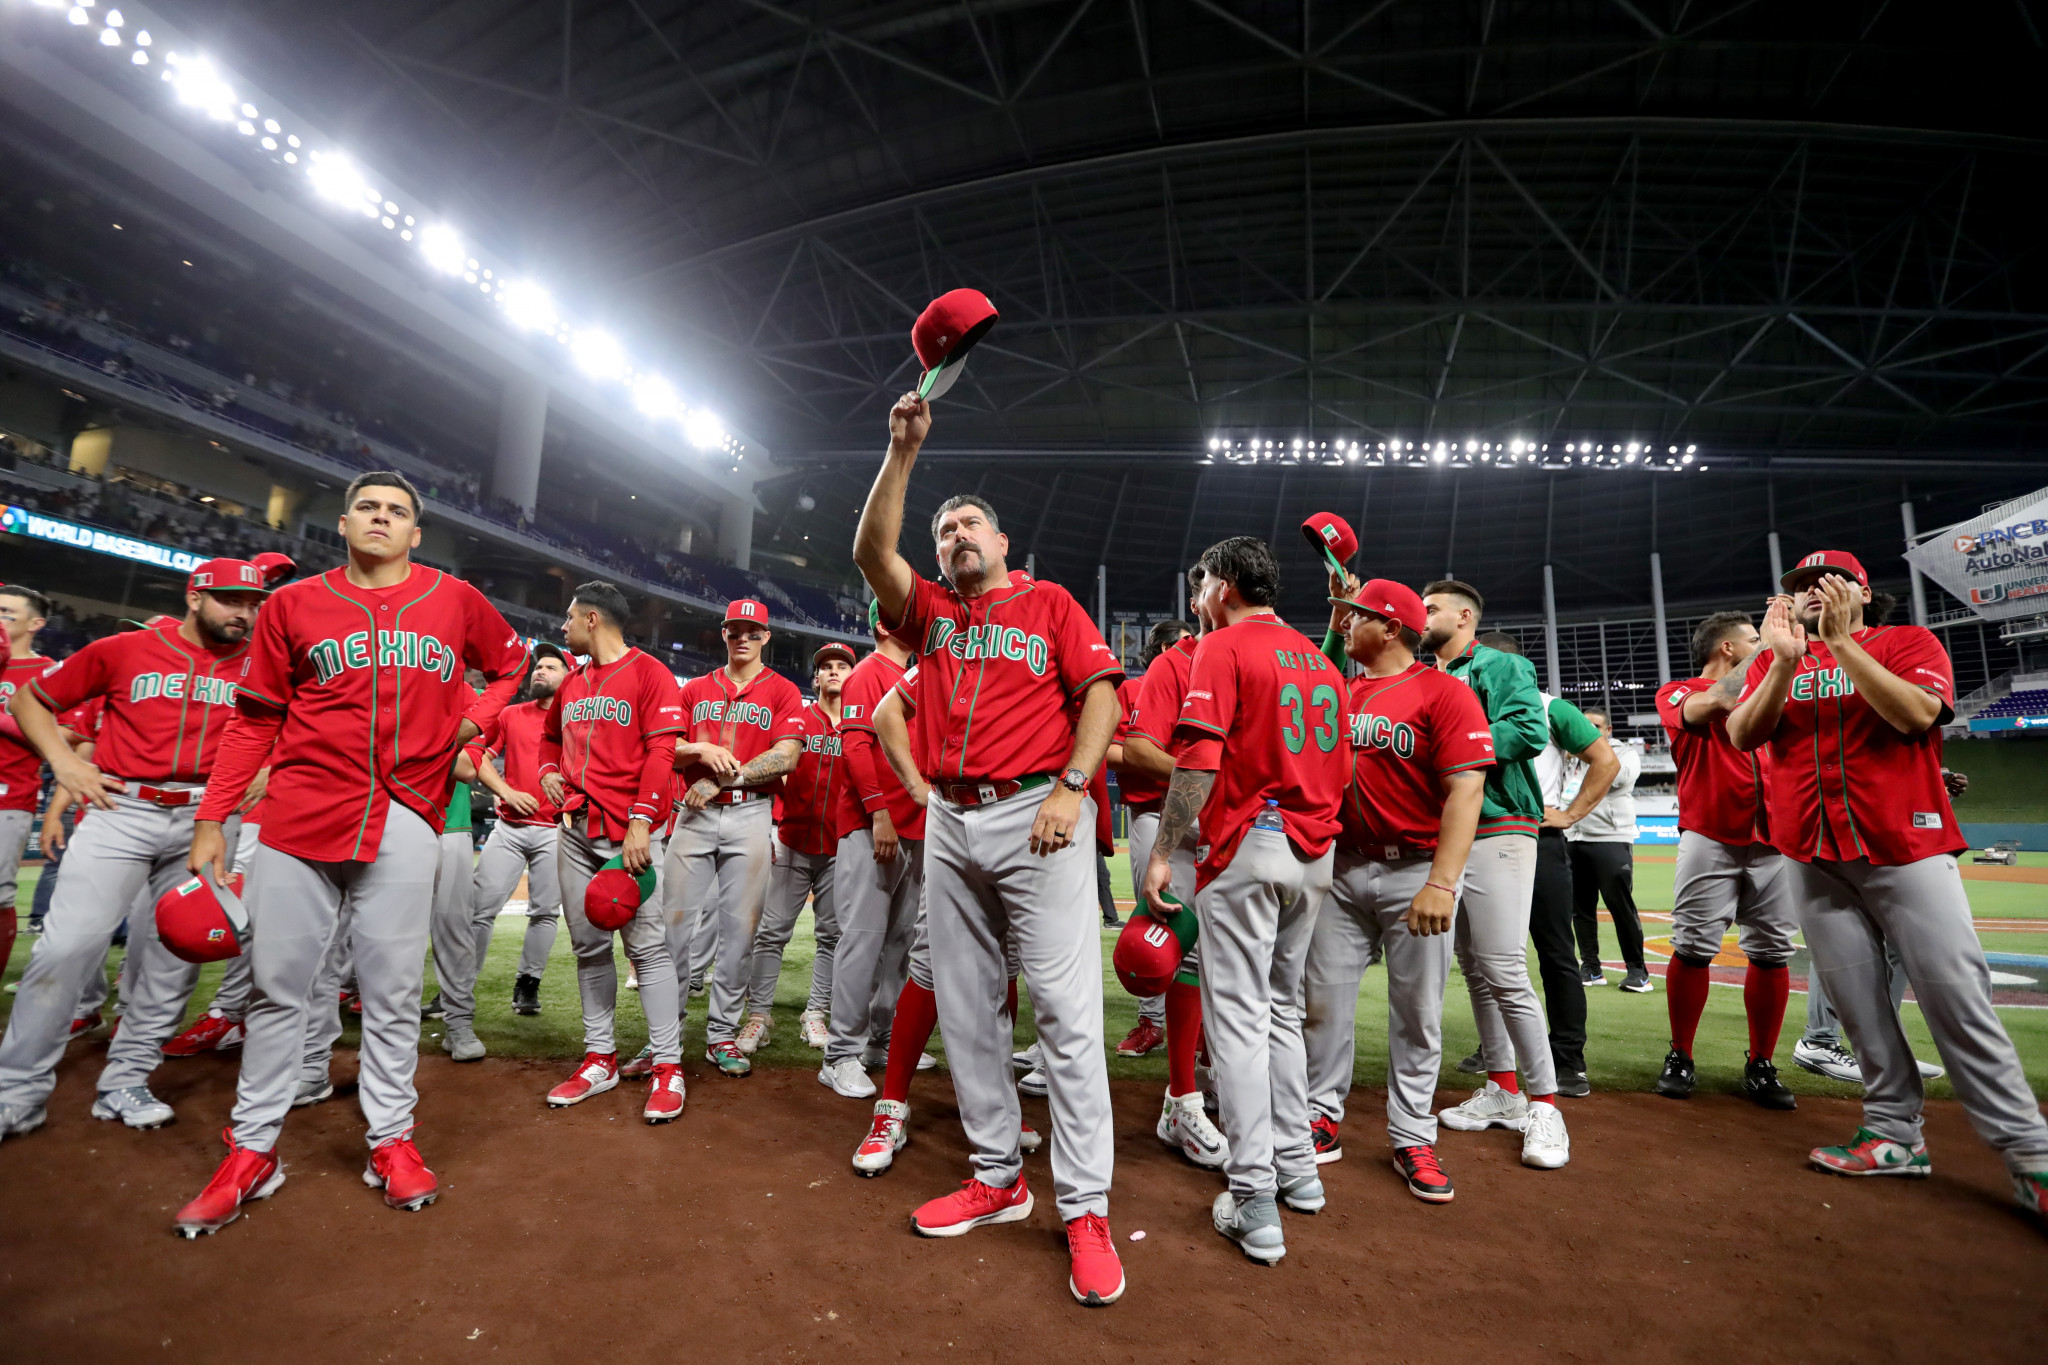 Mexico manager Benji Gil, waving cap, was proud of his team after they had narrowly failed to beat Japan in the World Baseball Classic semi-final ©Getty Images